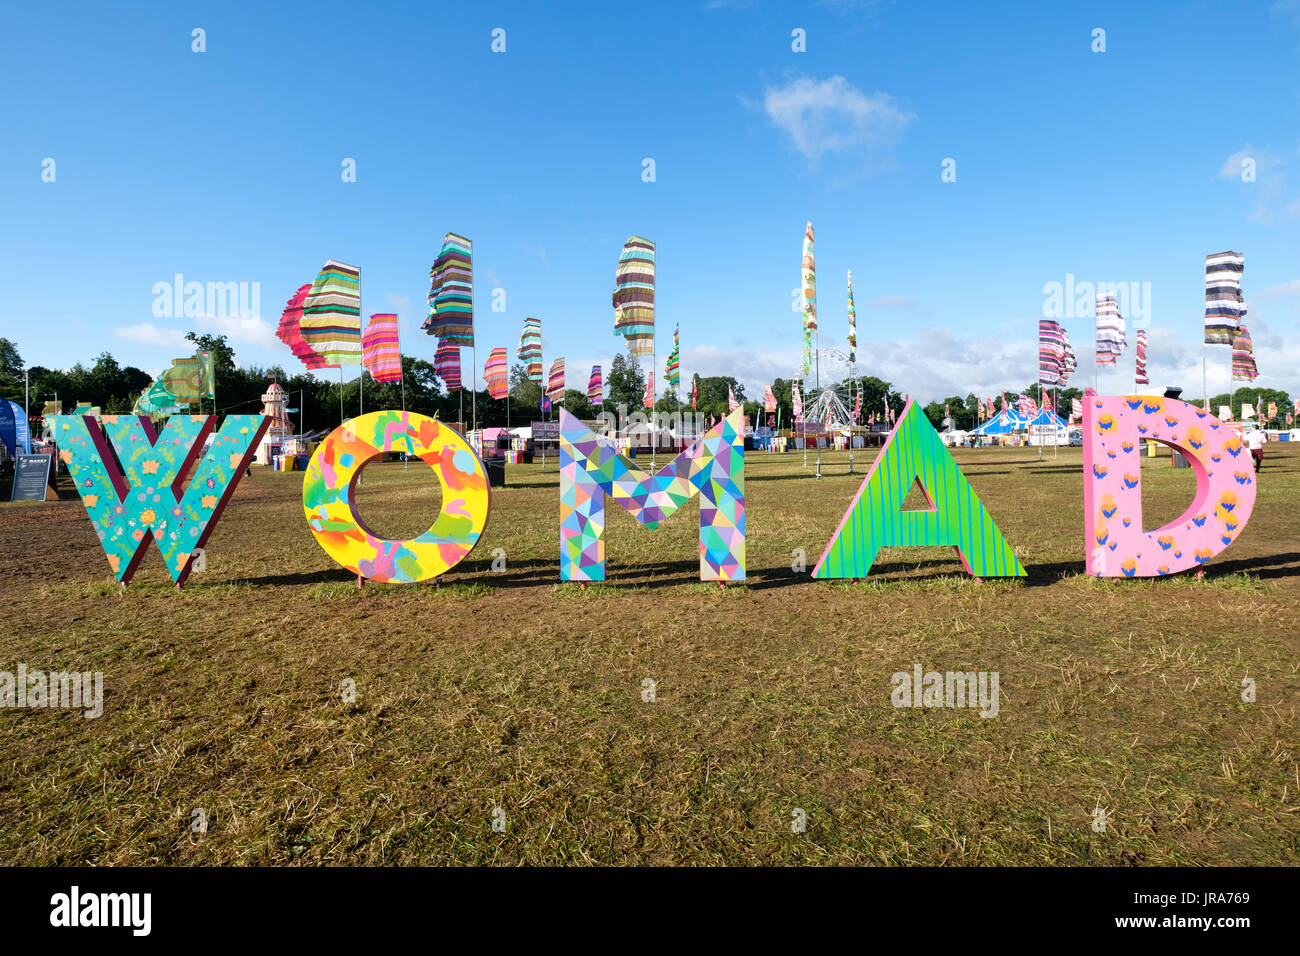 WOMAD multicolores signe, Festival Womad, Charlton Park, Malmesbury, Wiltshire, Angleterre, Juillet 30, 2017 Banque D'Images